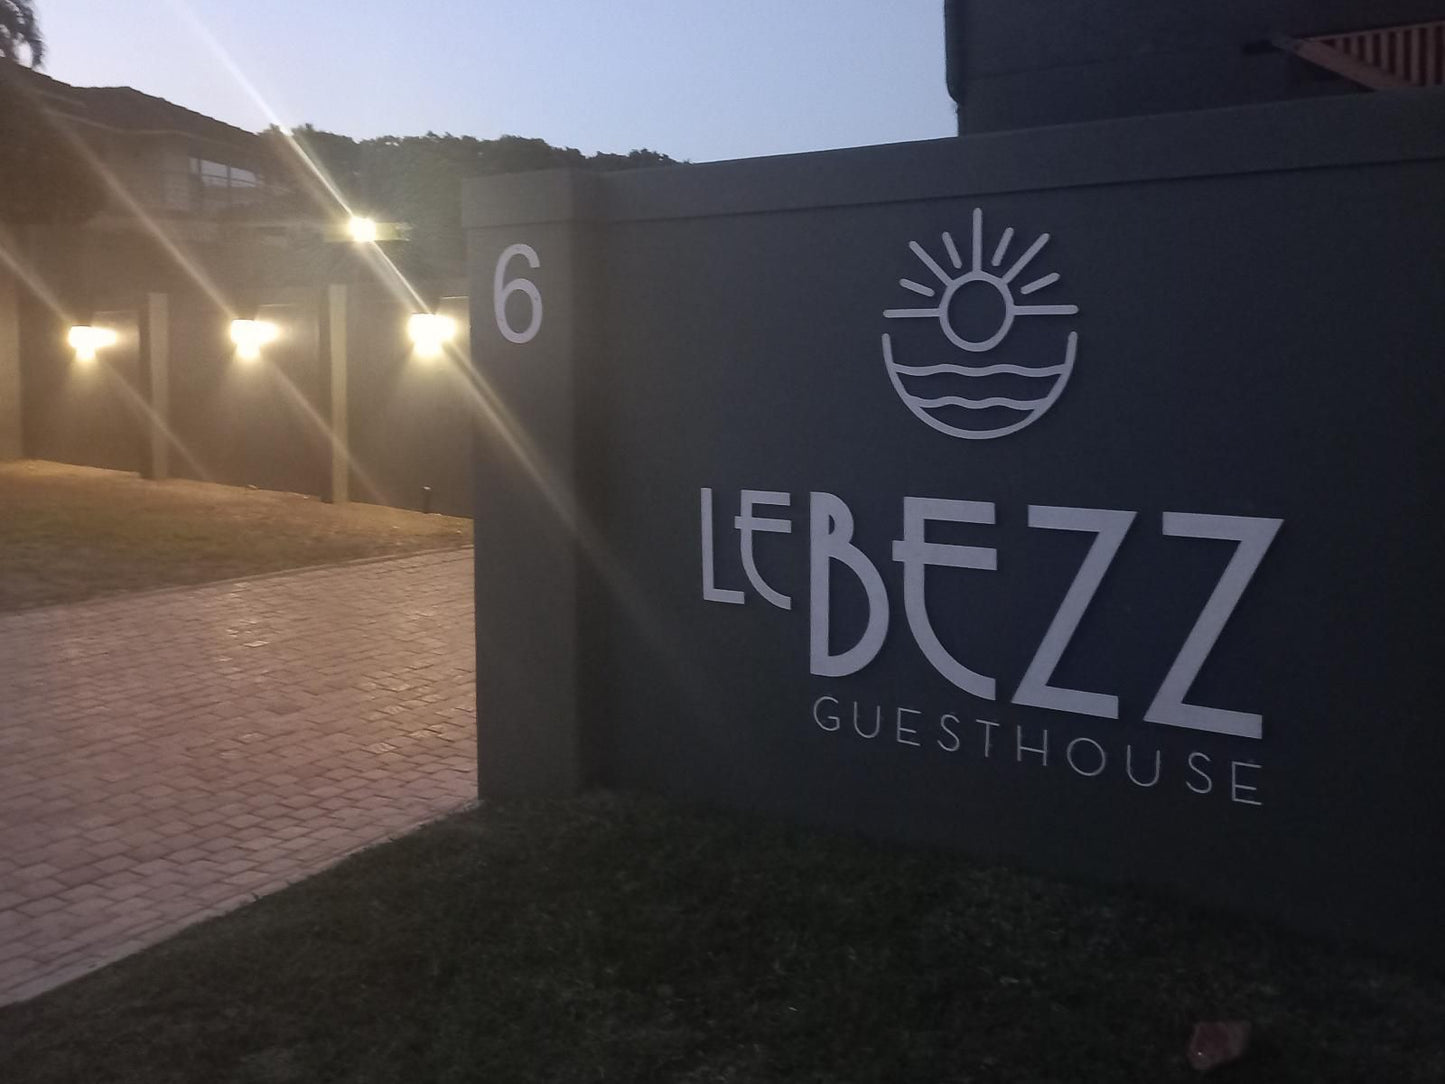 Le Bezz Guesthouse Ballito Kwazulu Natal South Africa Sign